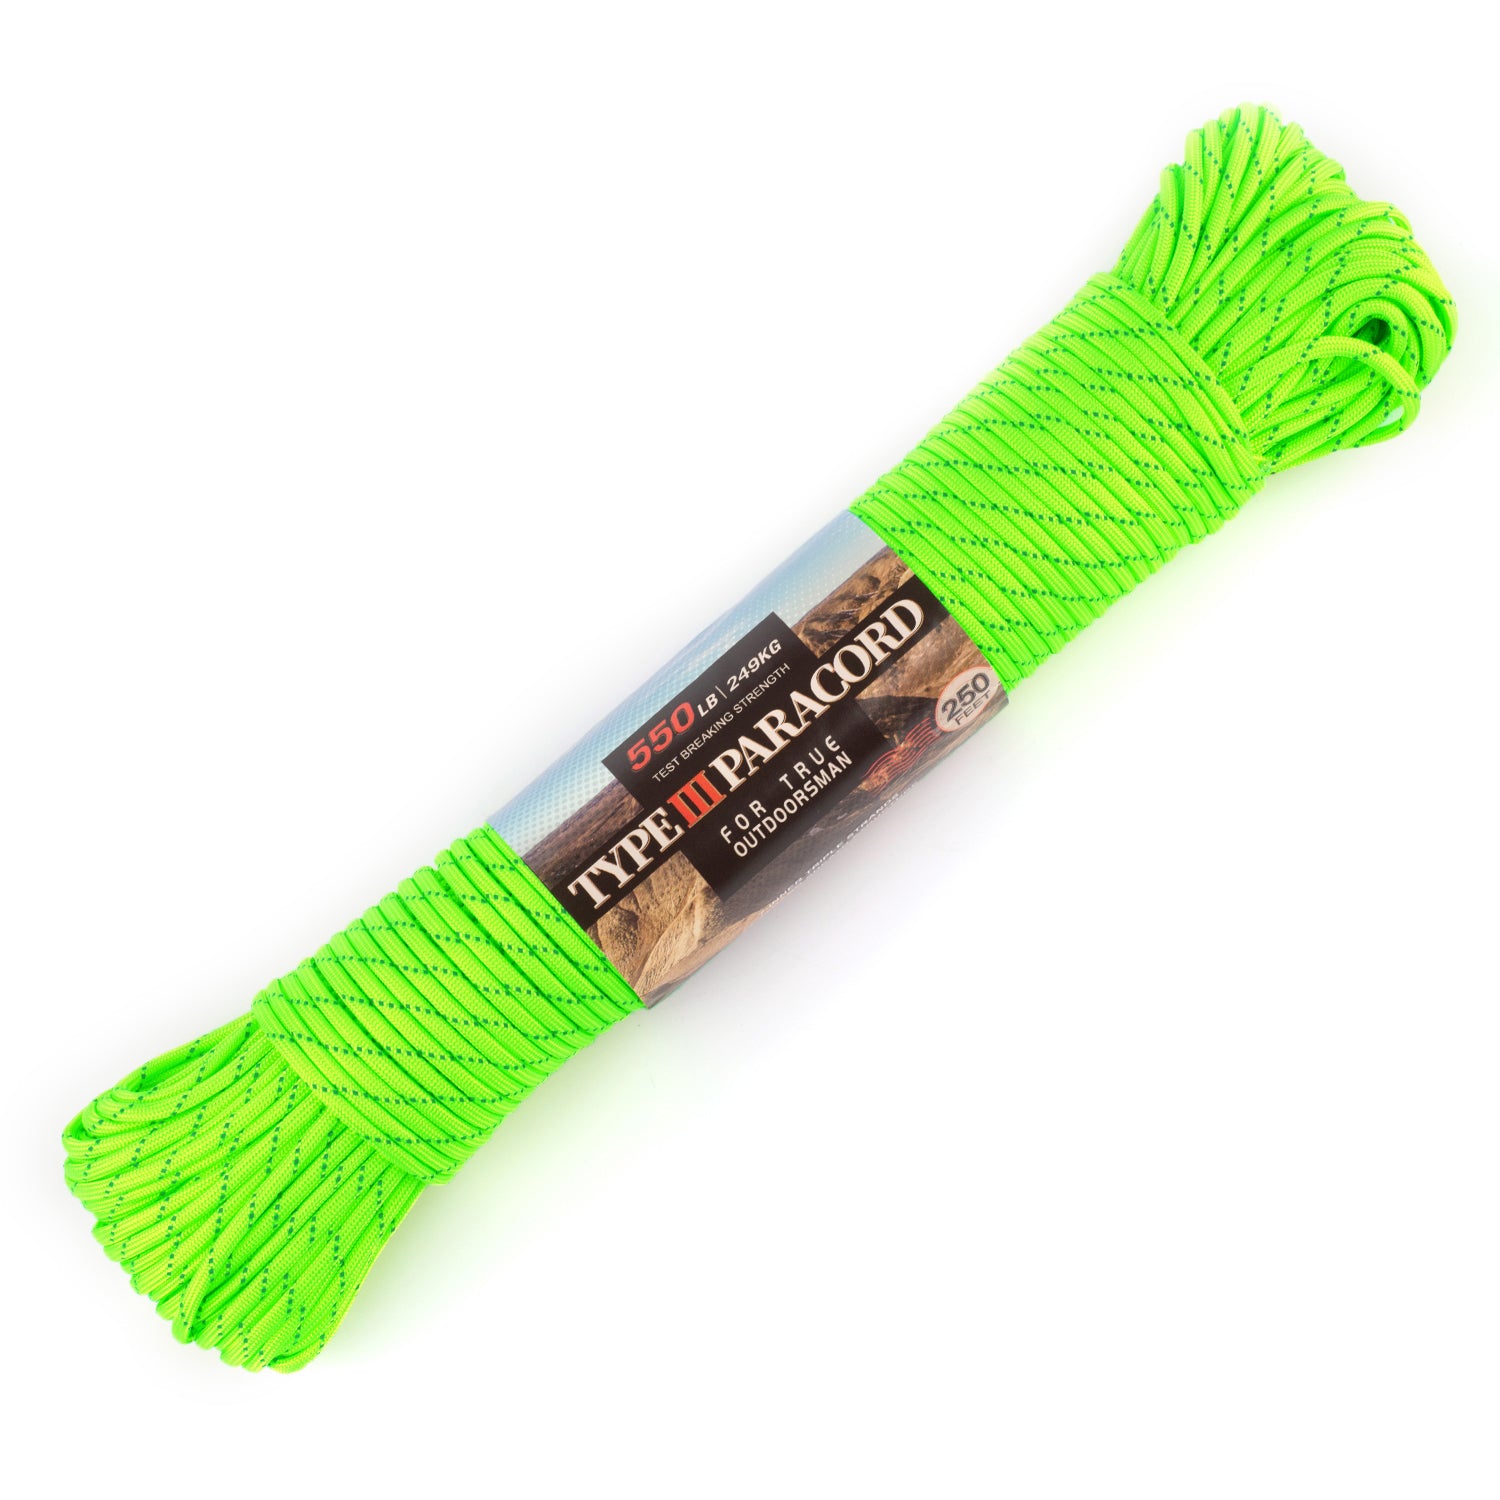 HERCULES Reflective 550 Paracord Neon Green for Camping Rope Type III Parachute Cord